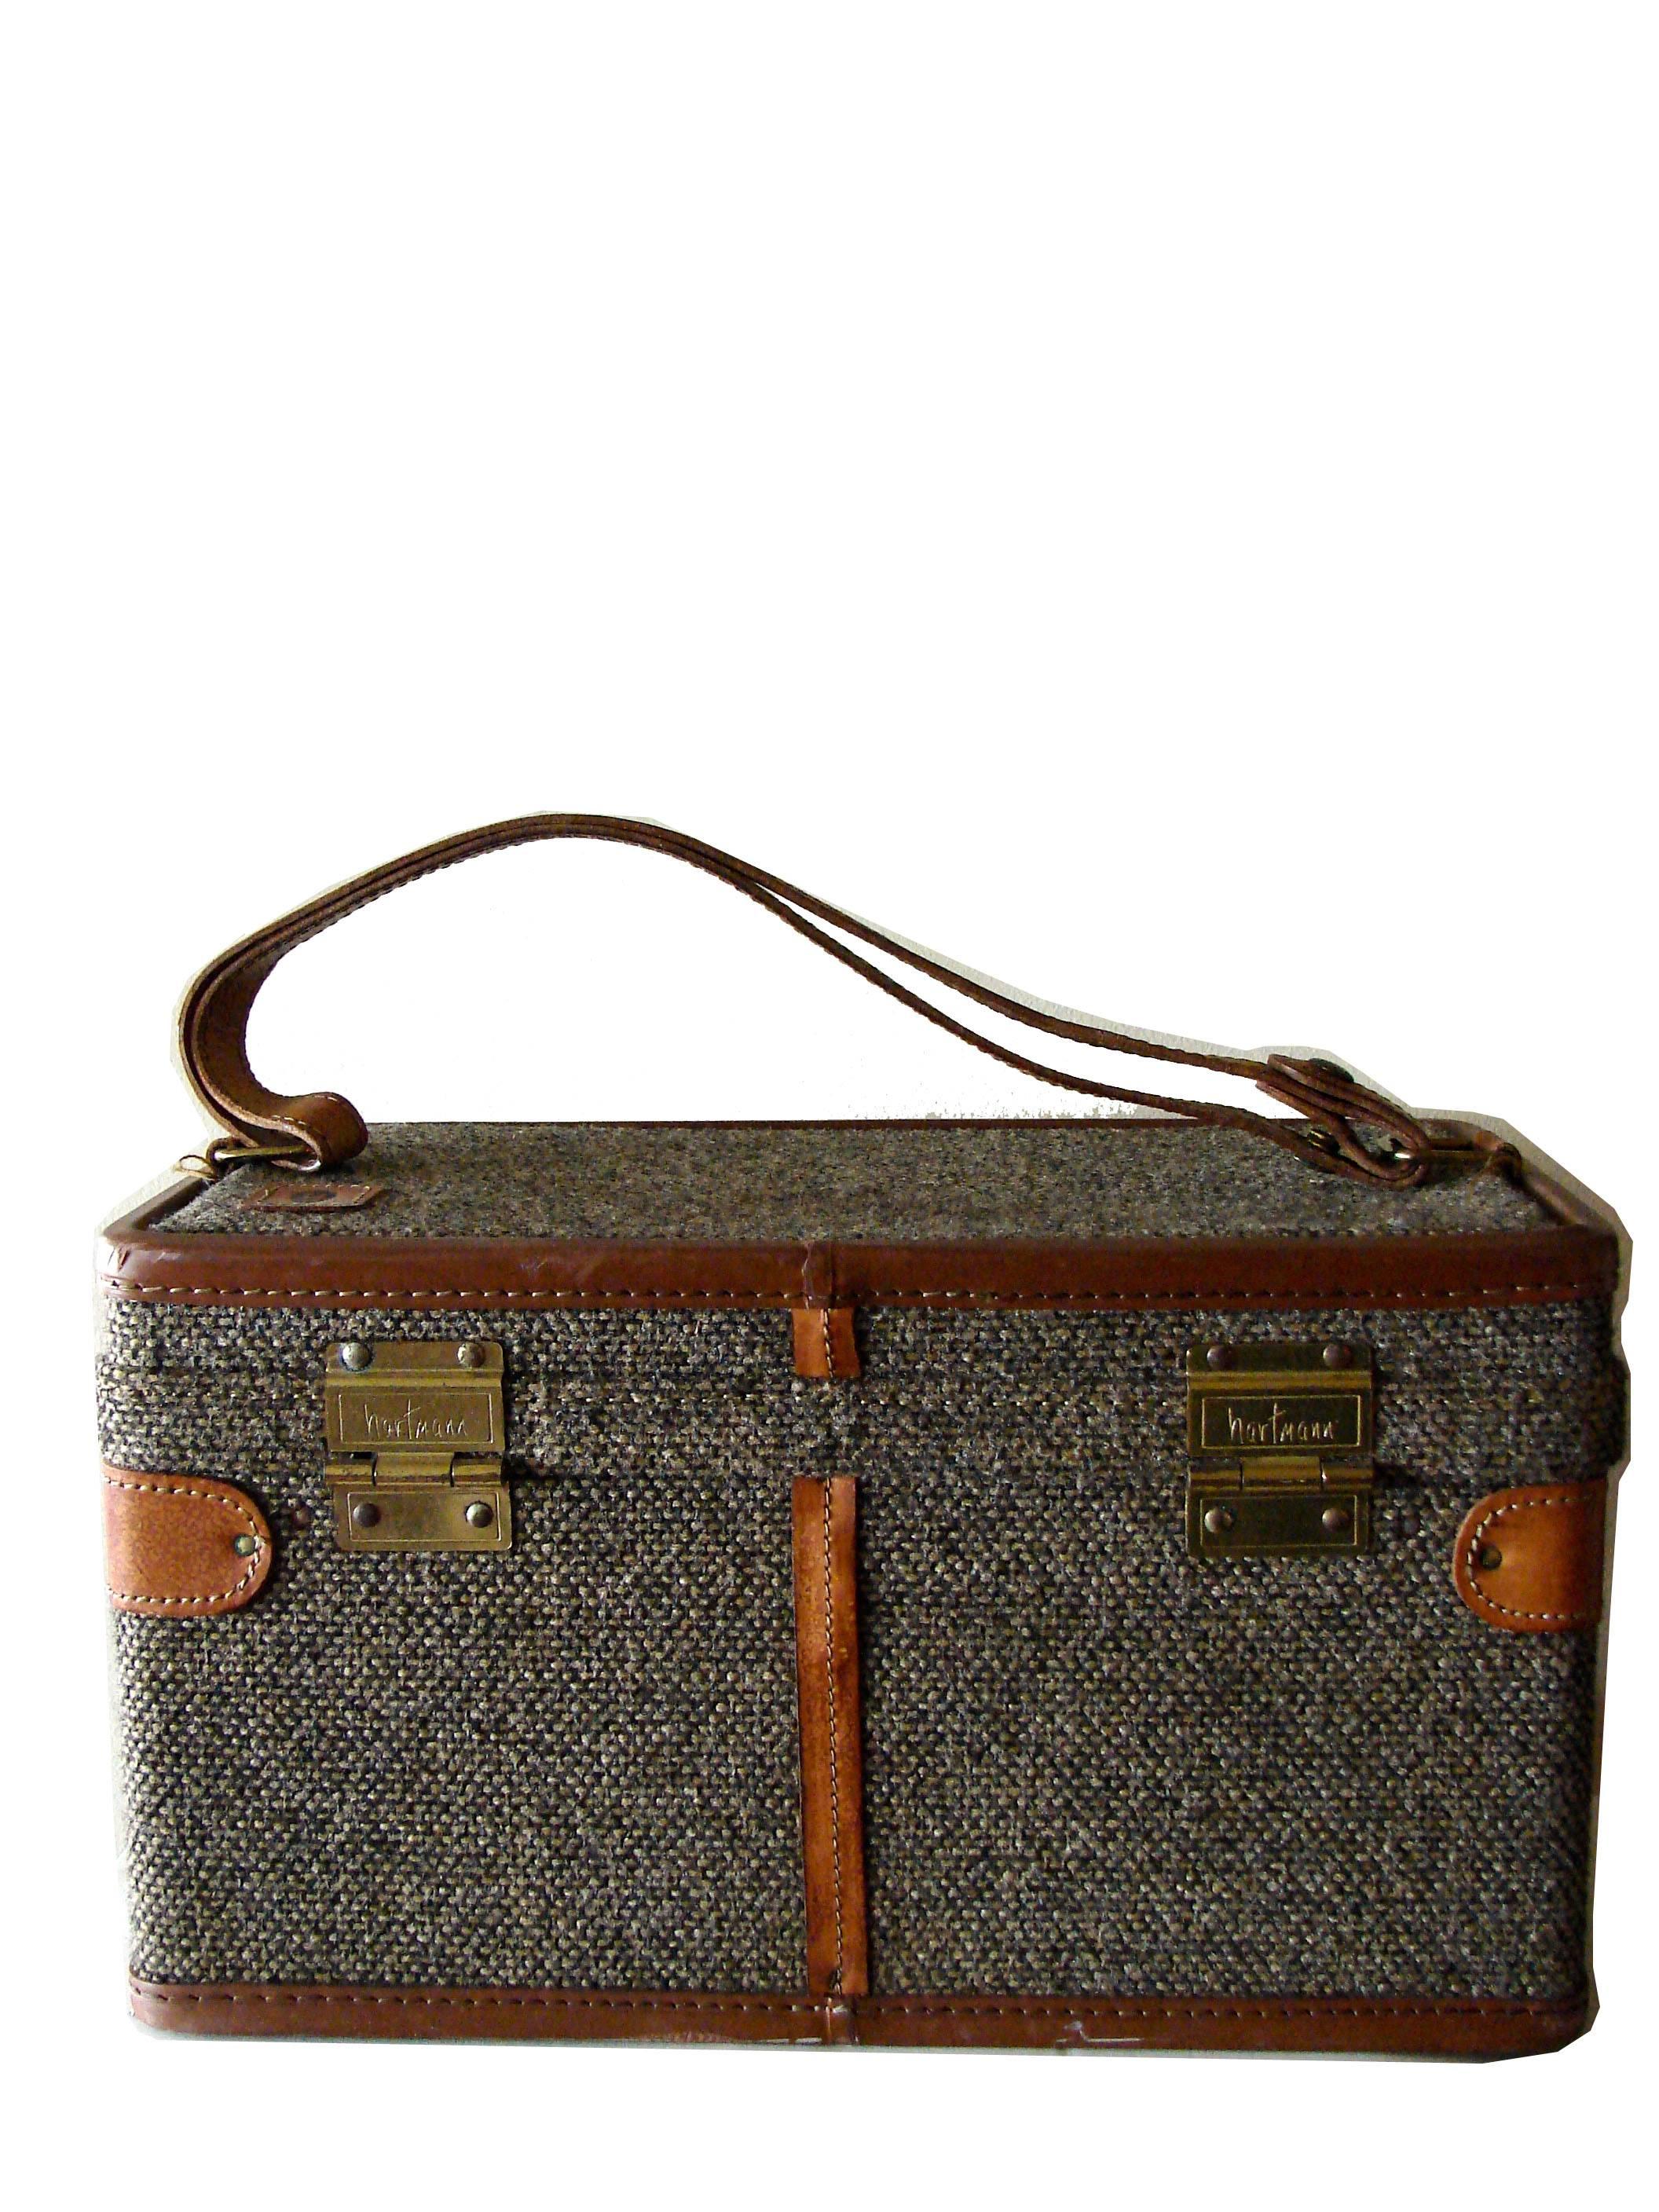 Women's or Men's 1970s Hartmann Tweed + Leather Train Case with Toile Lining + Adjustable Strap 